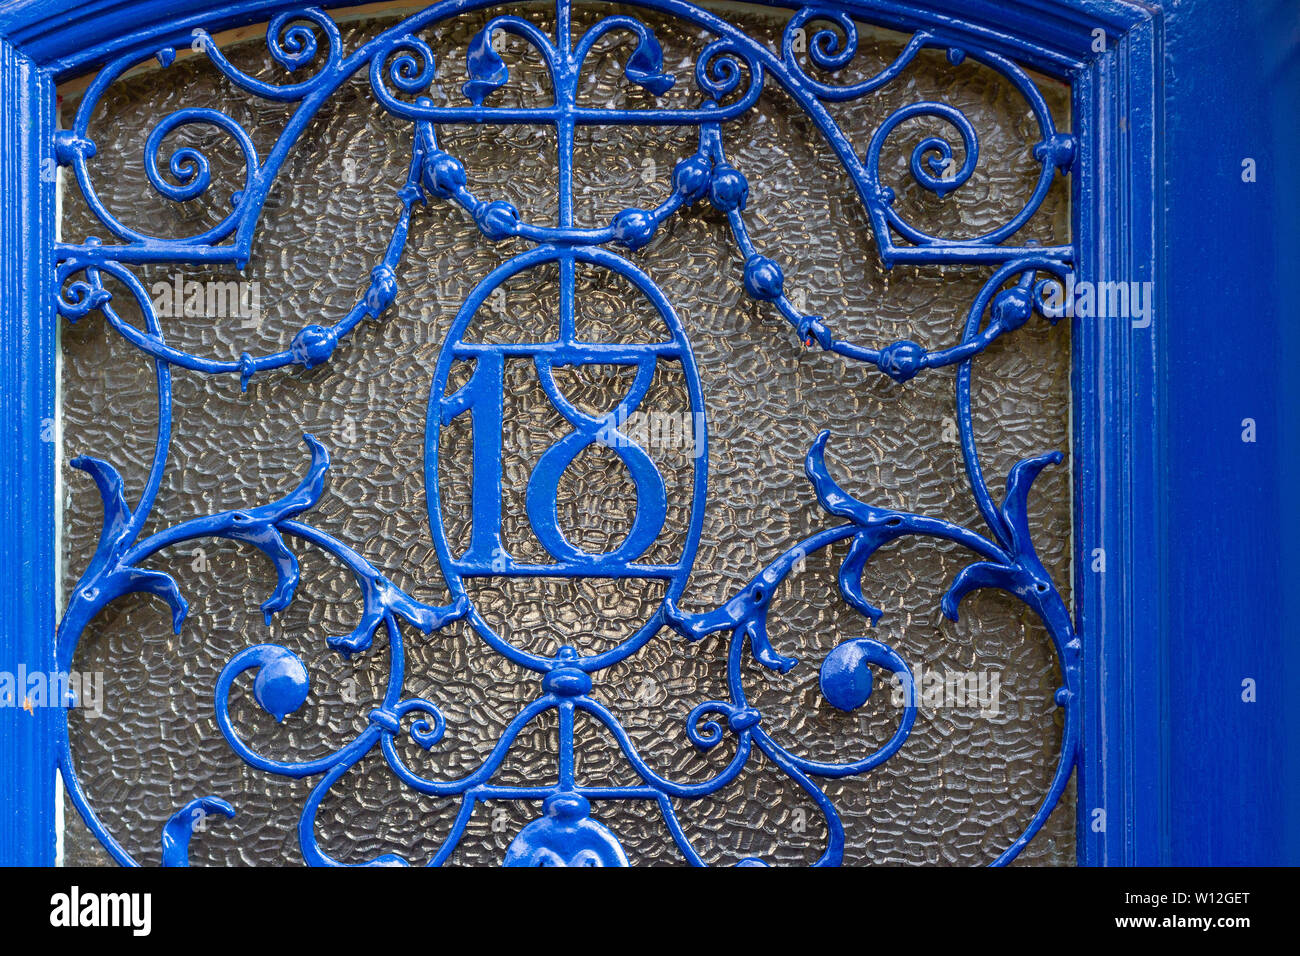 House number 18 worked in elaborate and ornate iron scrollwork on a glass door Stock Photo